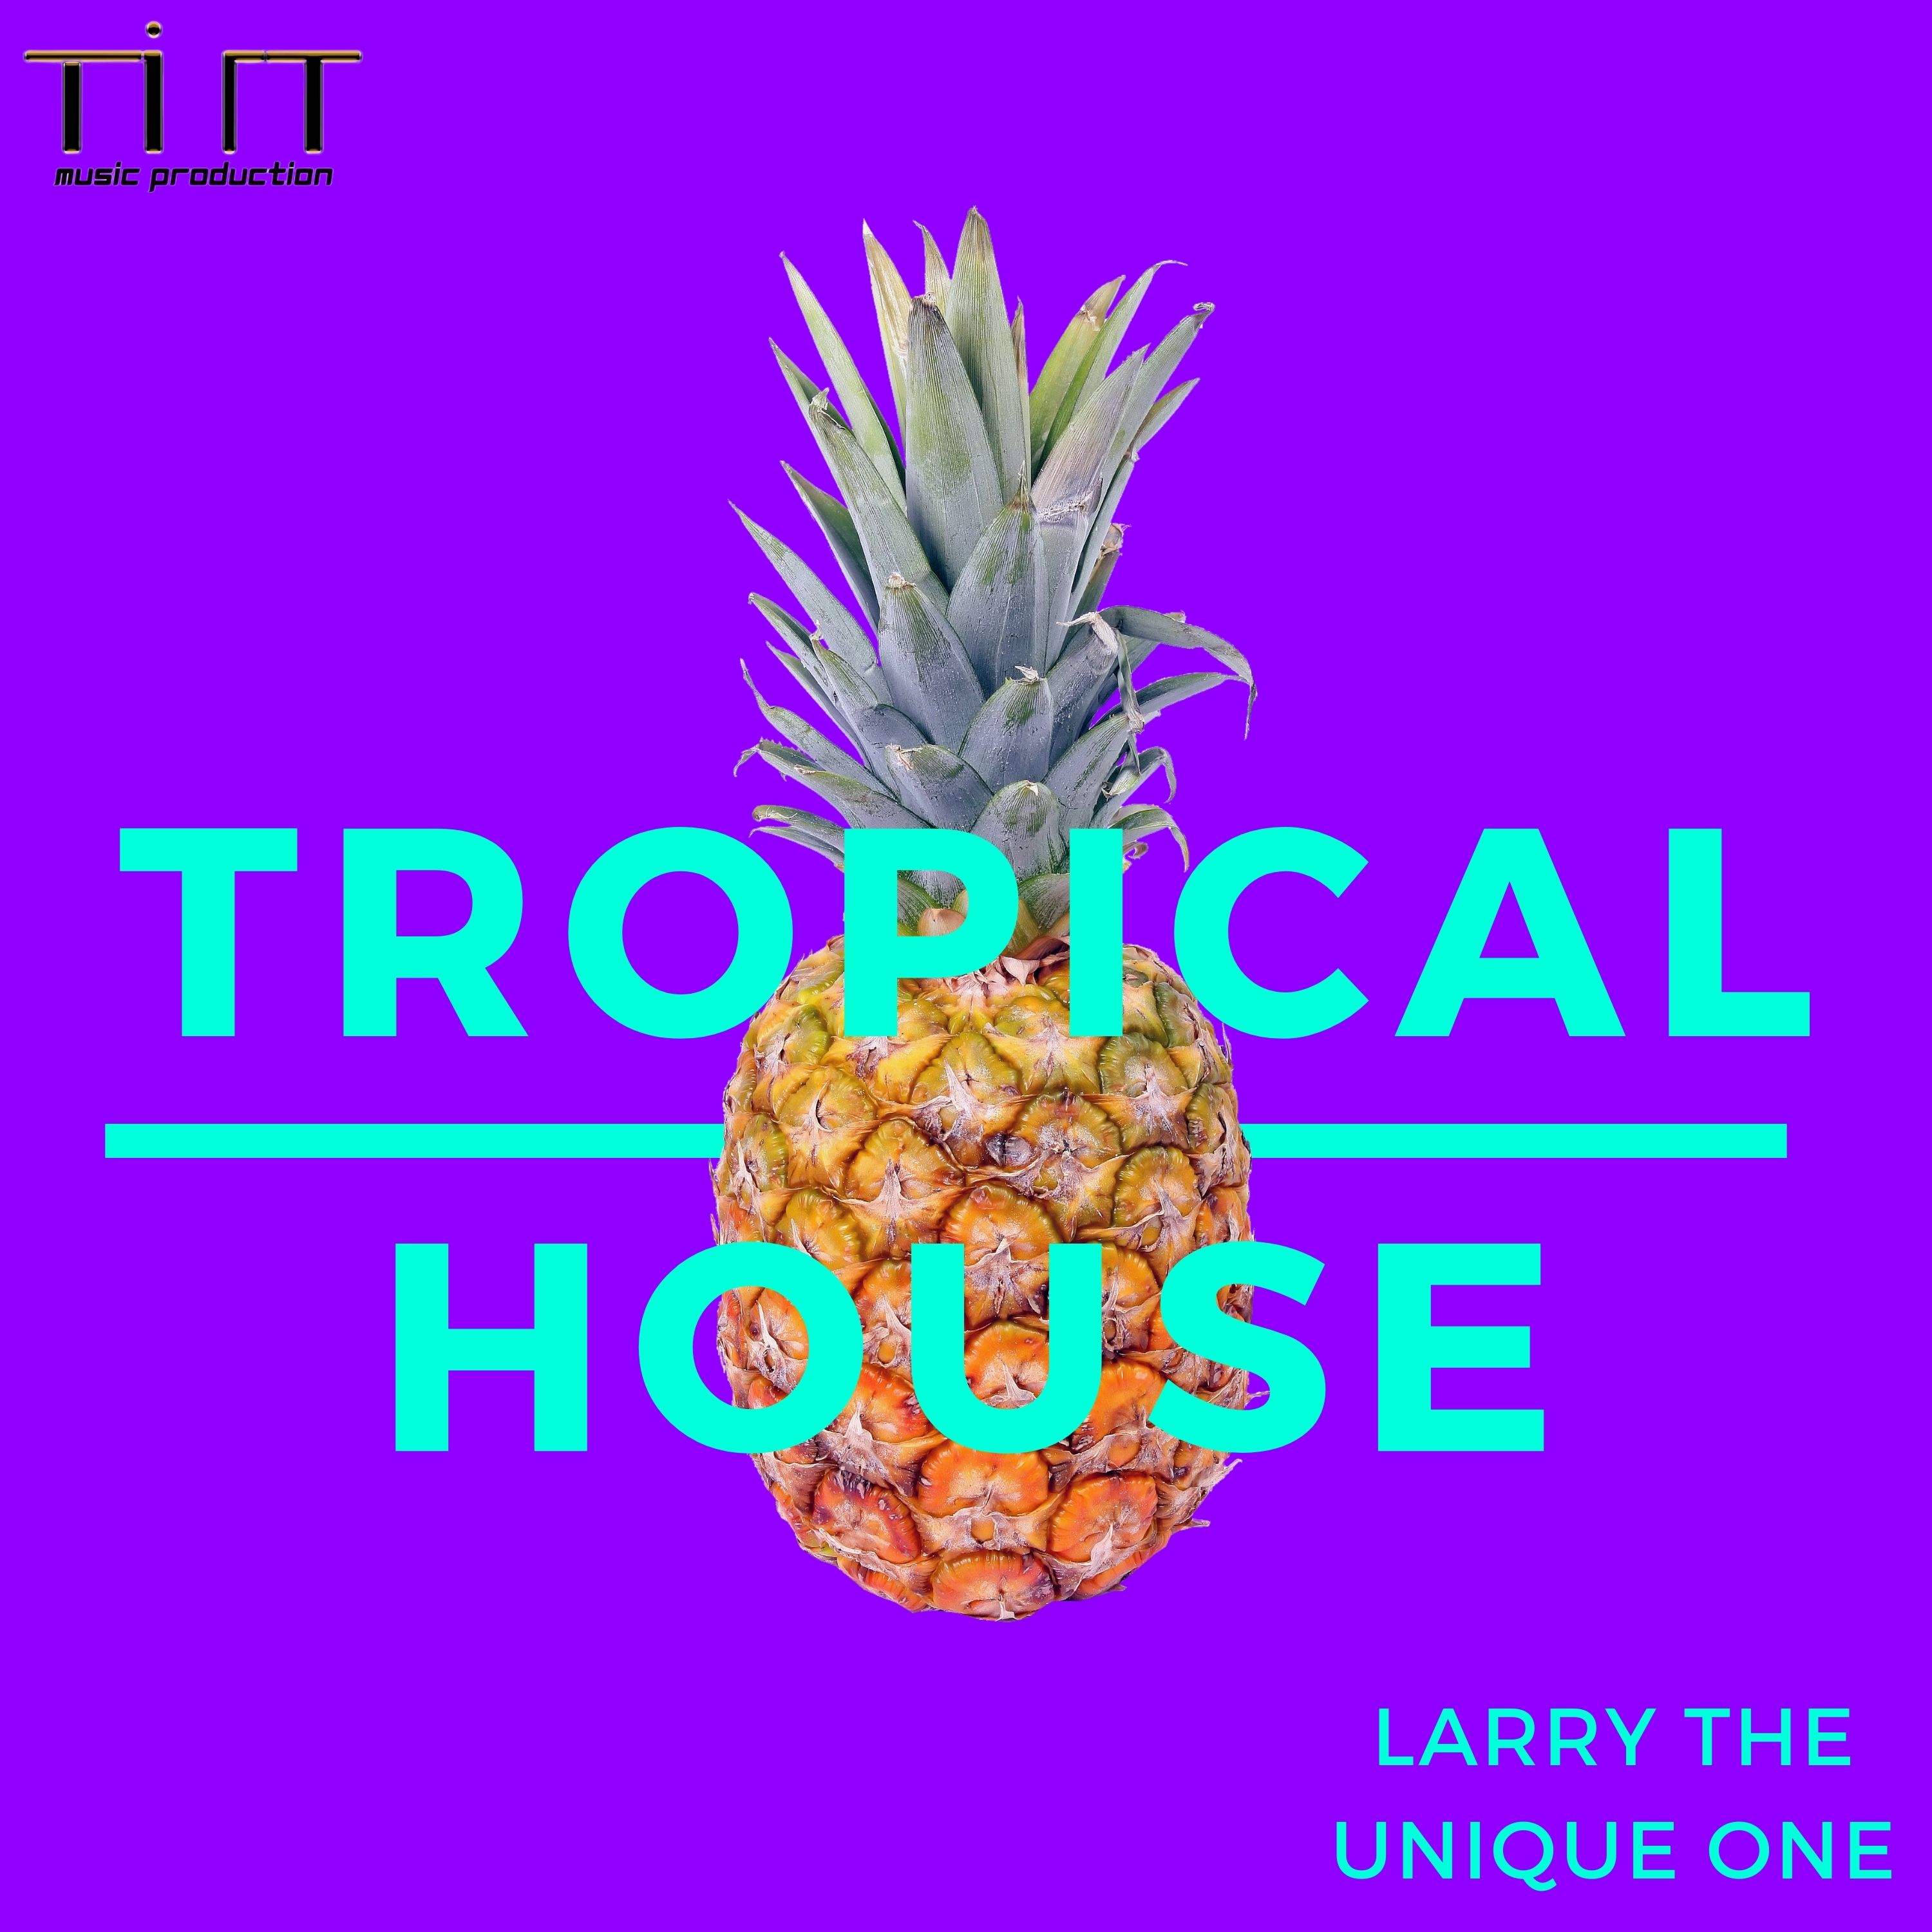 Tropical House is the new song performed by Larry the Unique One!